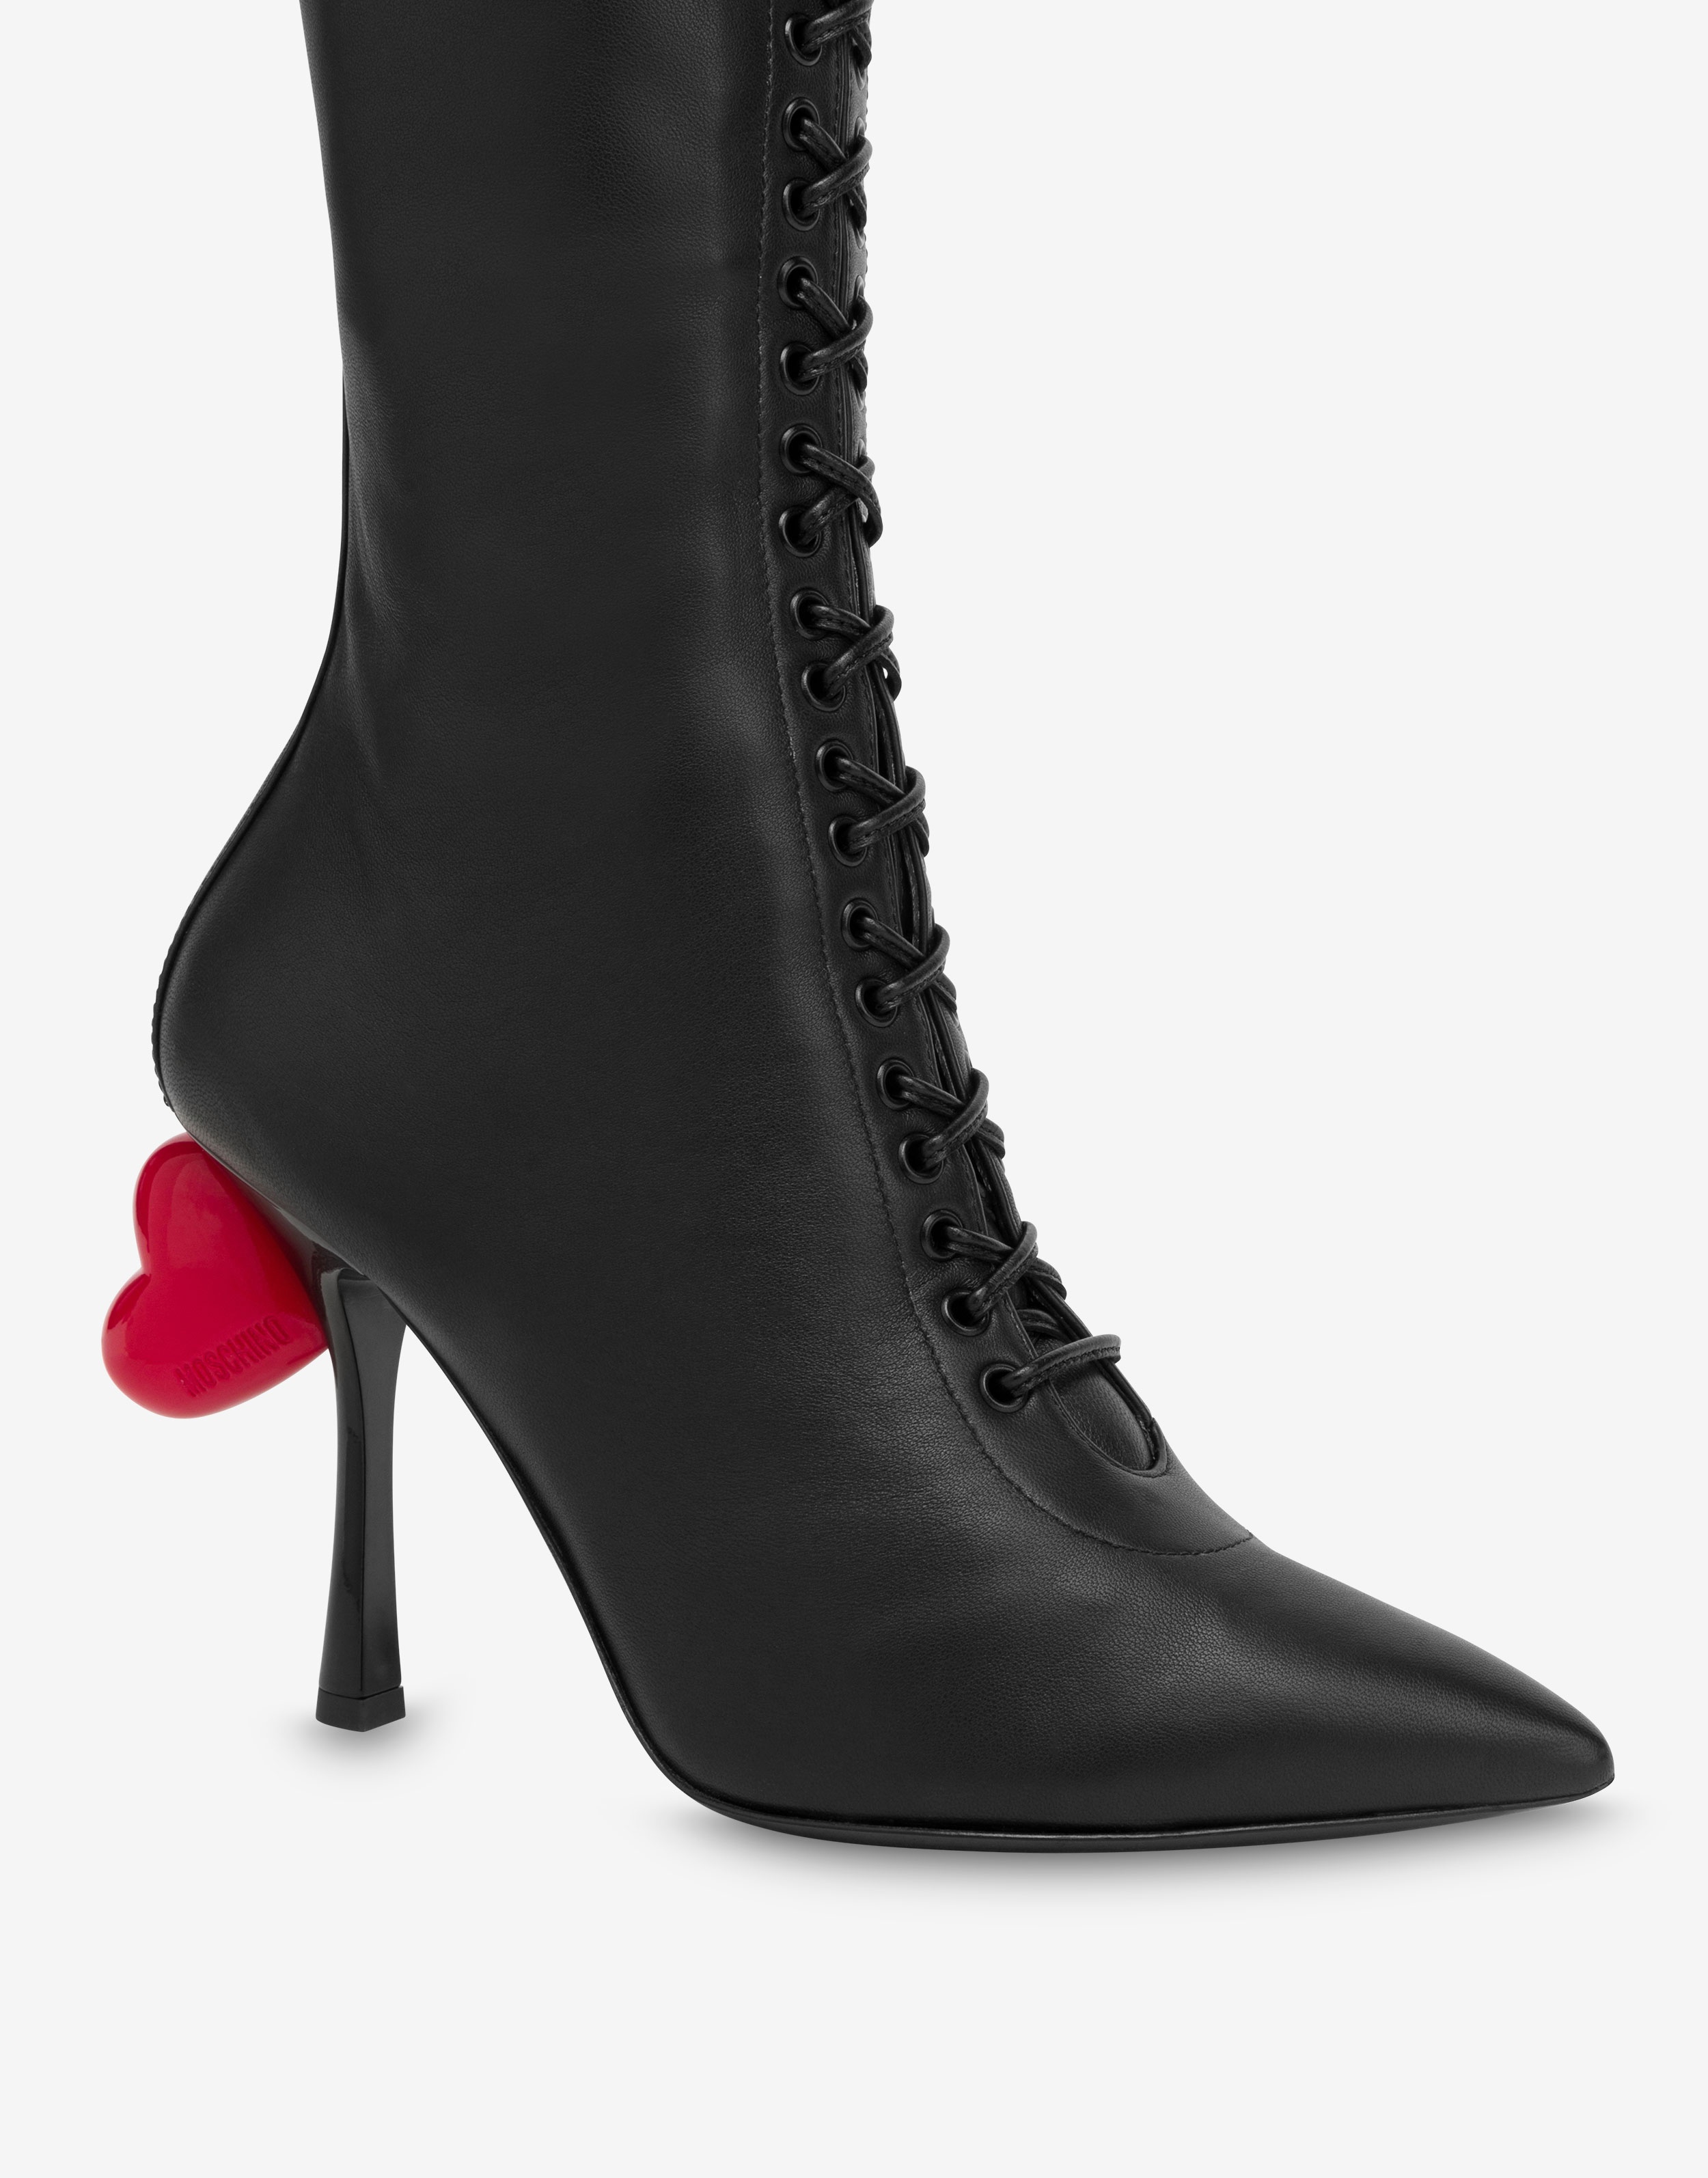 SWEET HEART NAPPA LEATHER BOOTS - 4